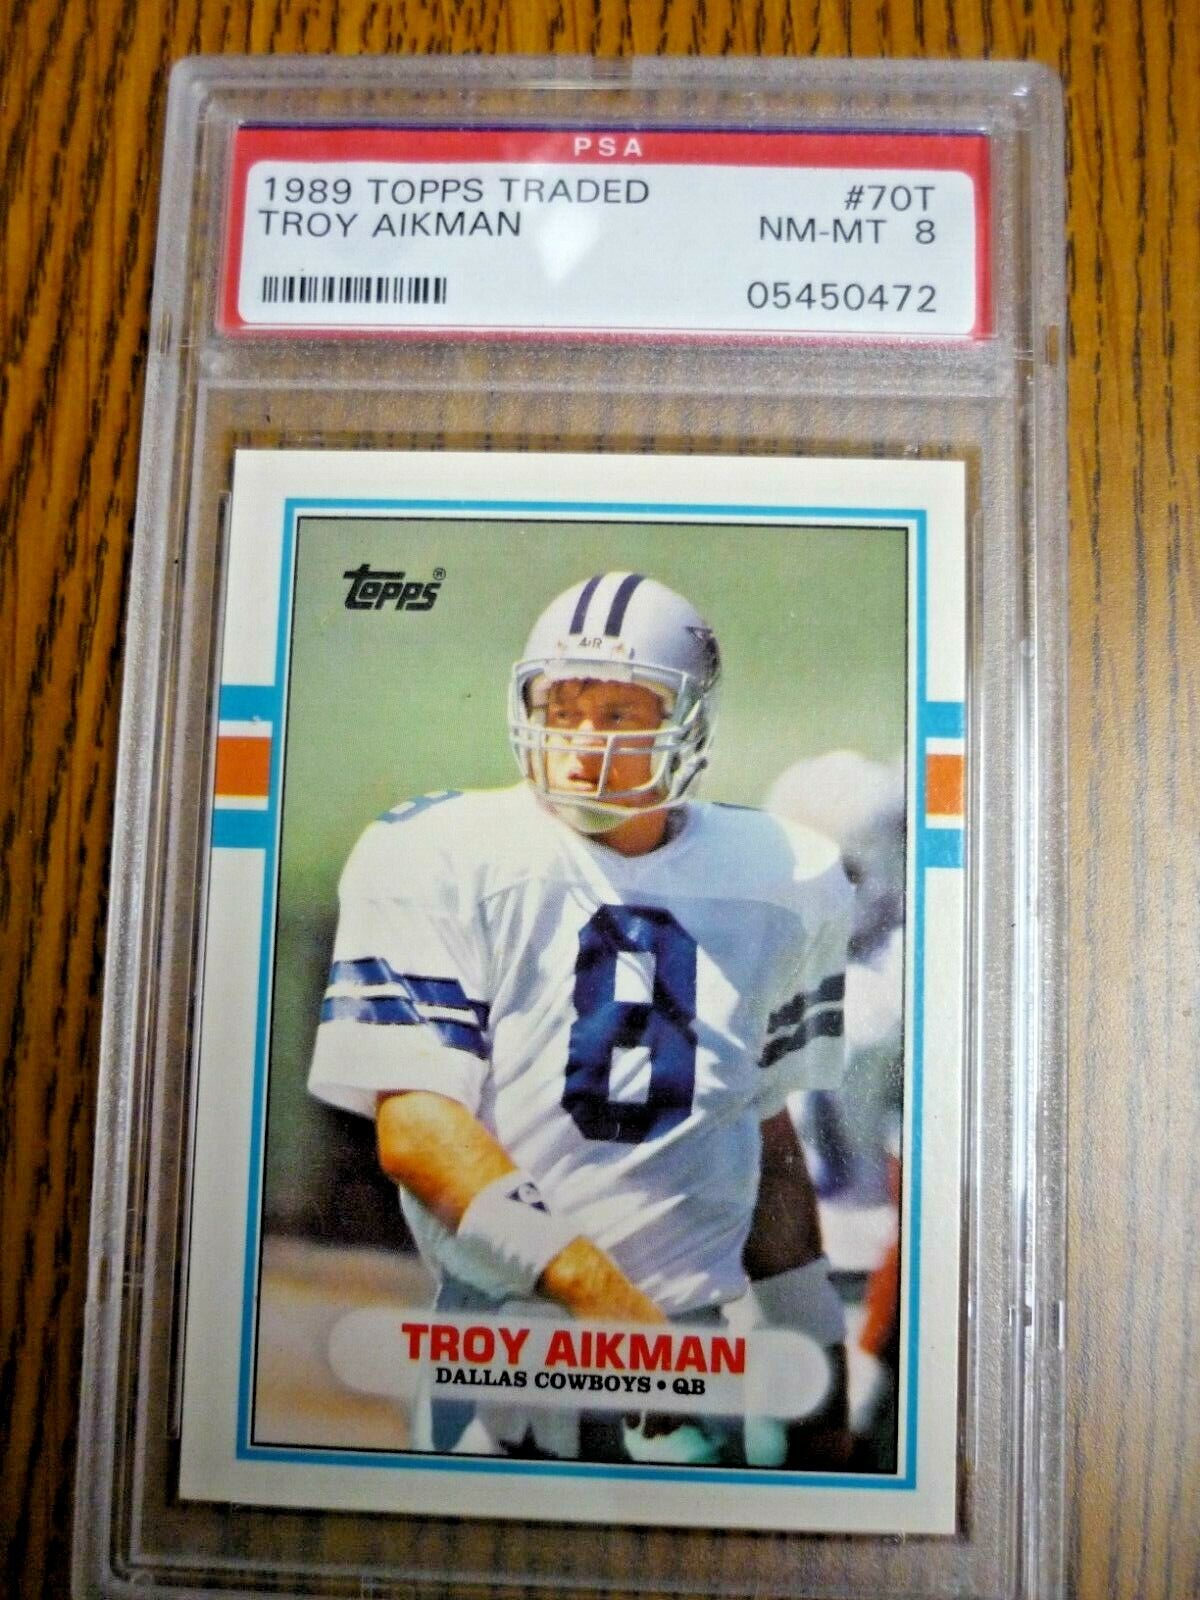 1989 TOPPS Traded TROY AIKMAN - ROOKIE Football Card  - #70T - PSA 8 NM-MT